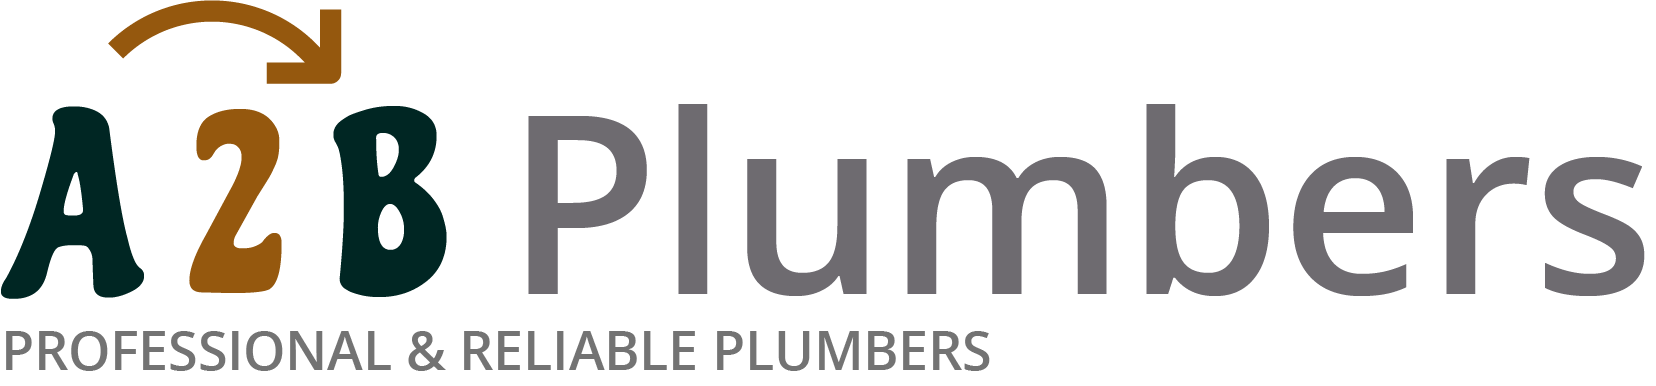 If you need a boiler installed, a radiator repaired or a leaking tap fixed, call us now - we provide services for properties in Colindale and the local area.